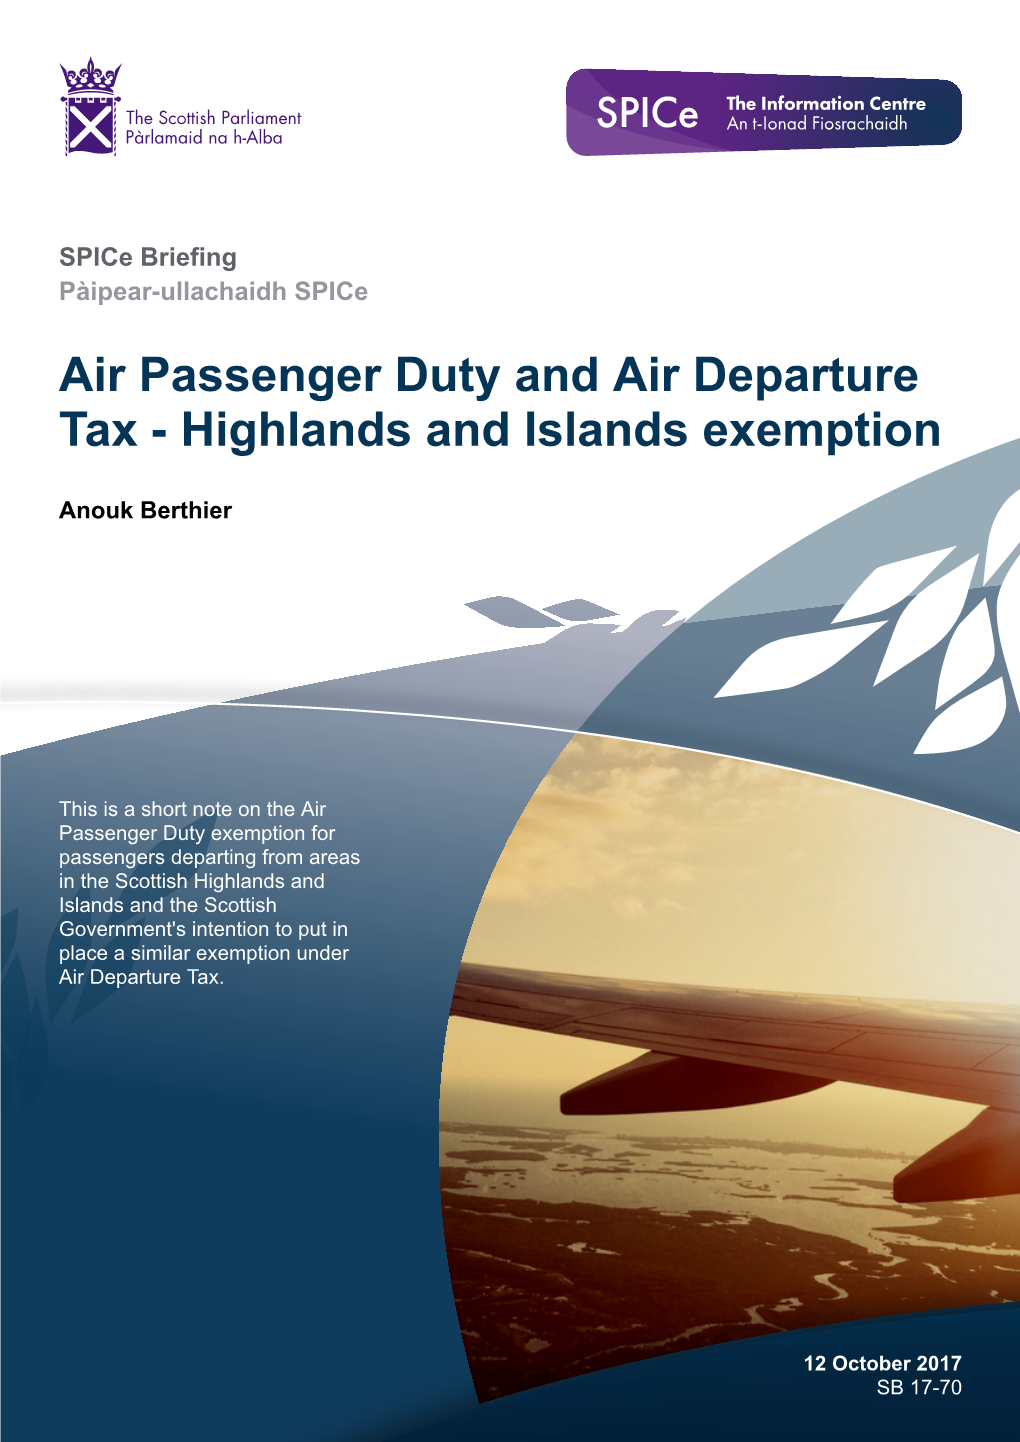 Air Passenger Duty and Air Departure Tax - Highlands and Islands Exemption